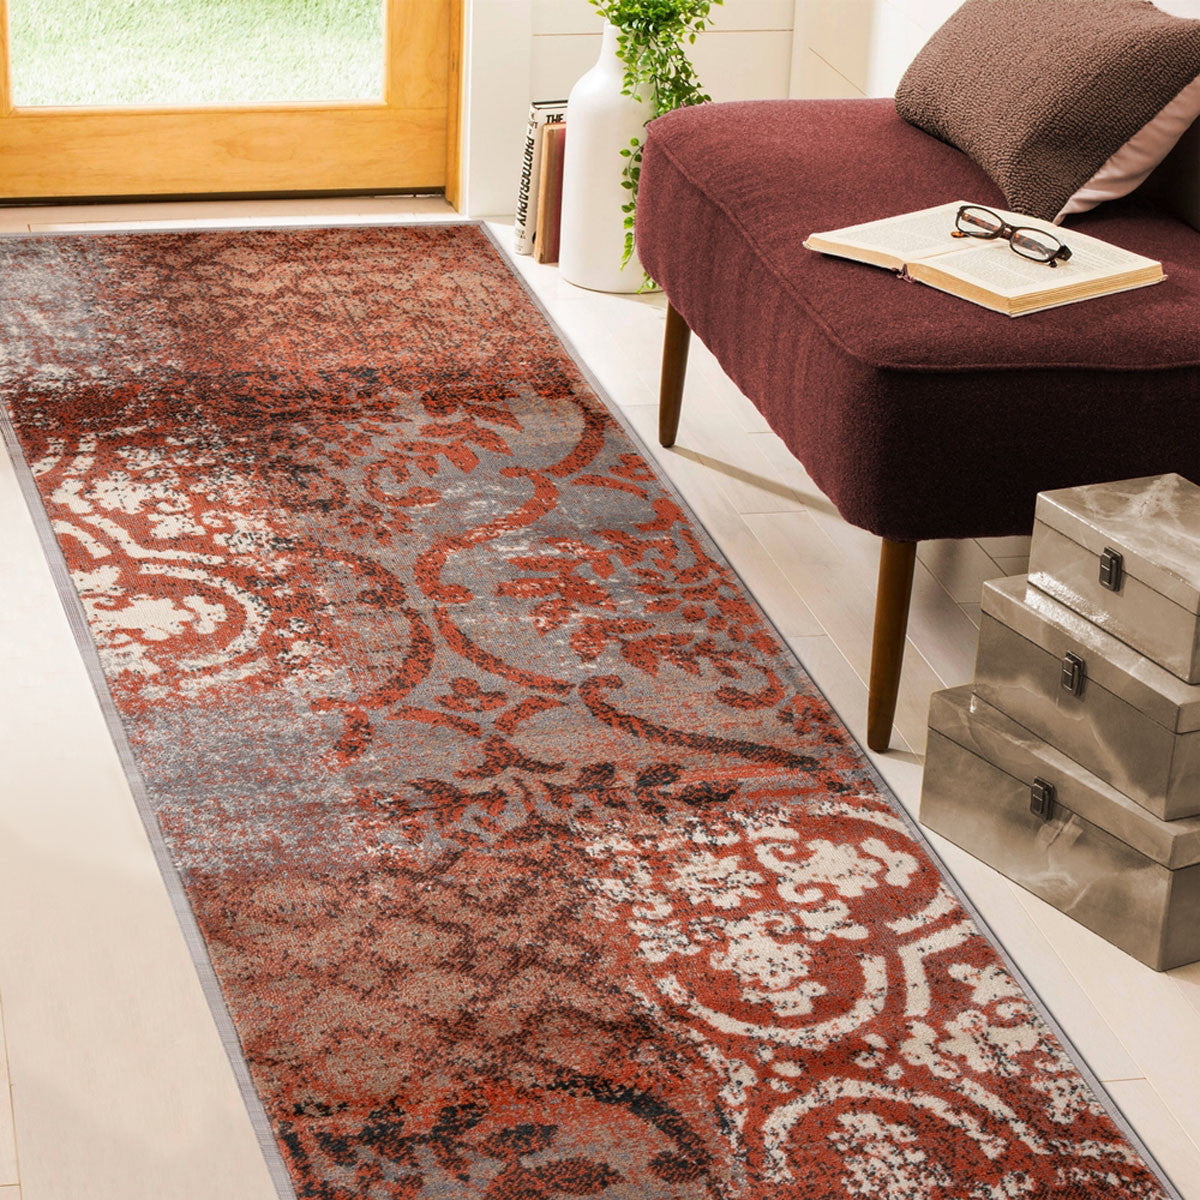 8' Rust And Gray Damask Distressed Stain Resistant Runner Rug